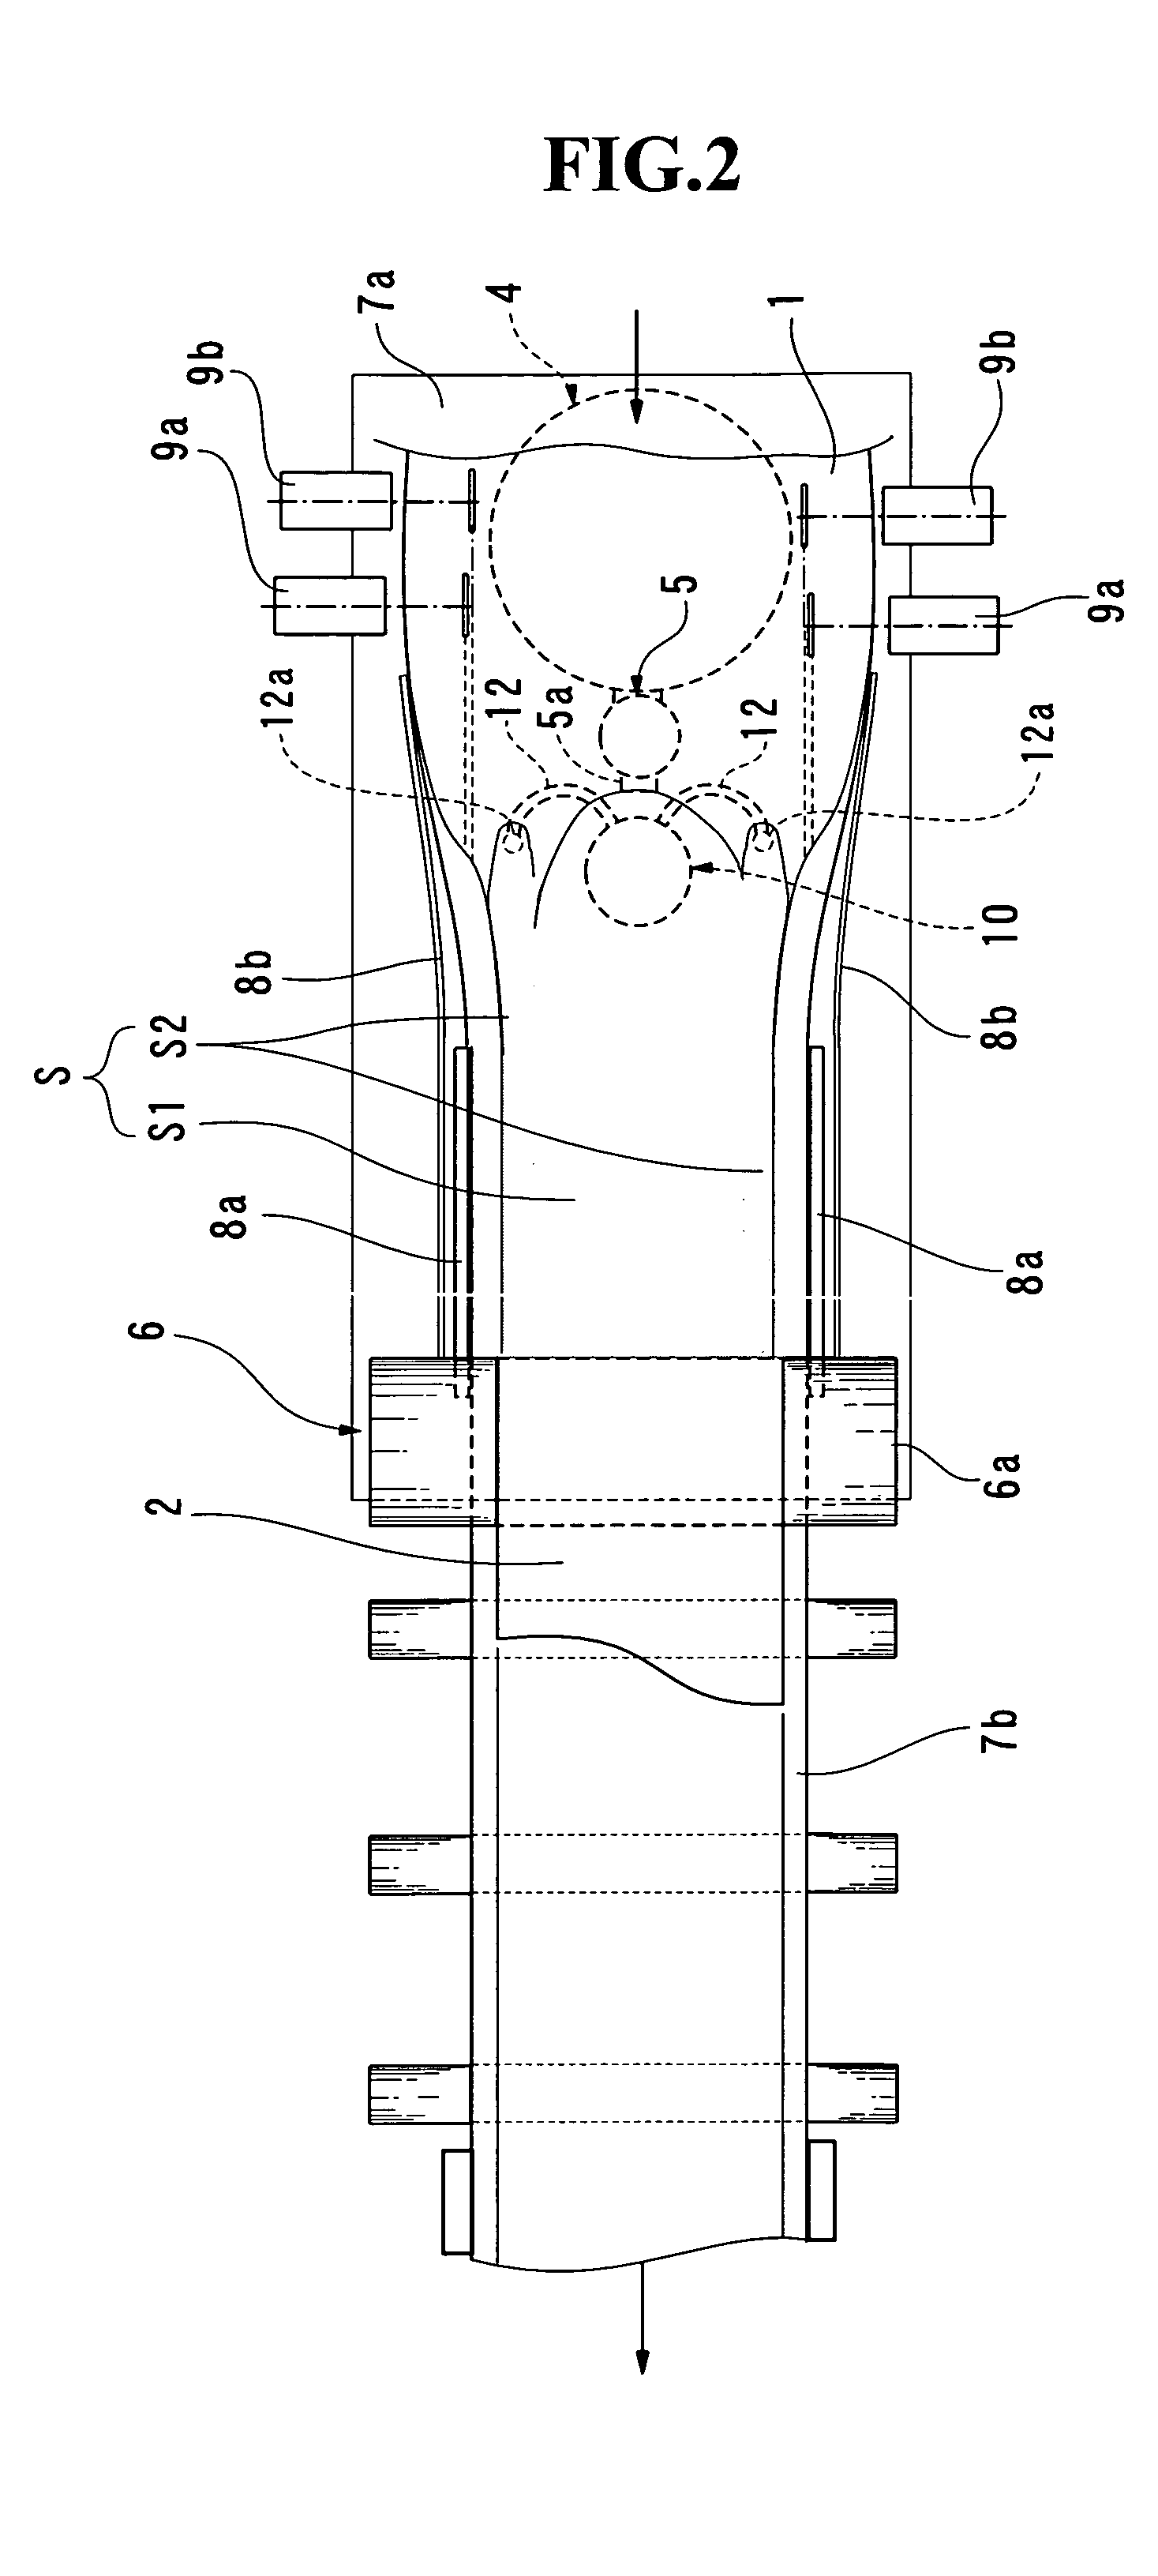 Apparatus and method for fractionating gypsum slurry and method of producing gypsum board